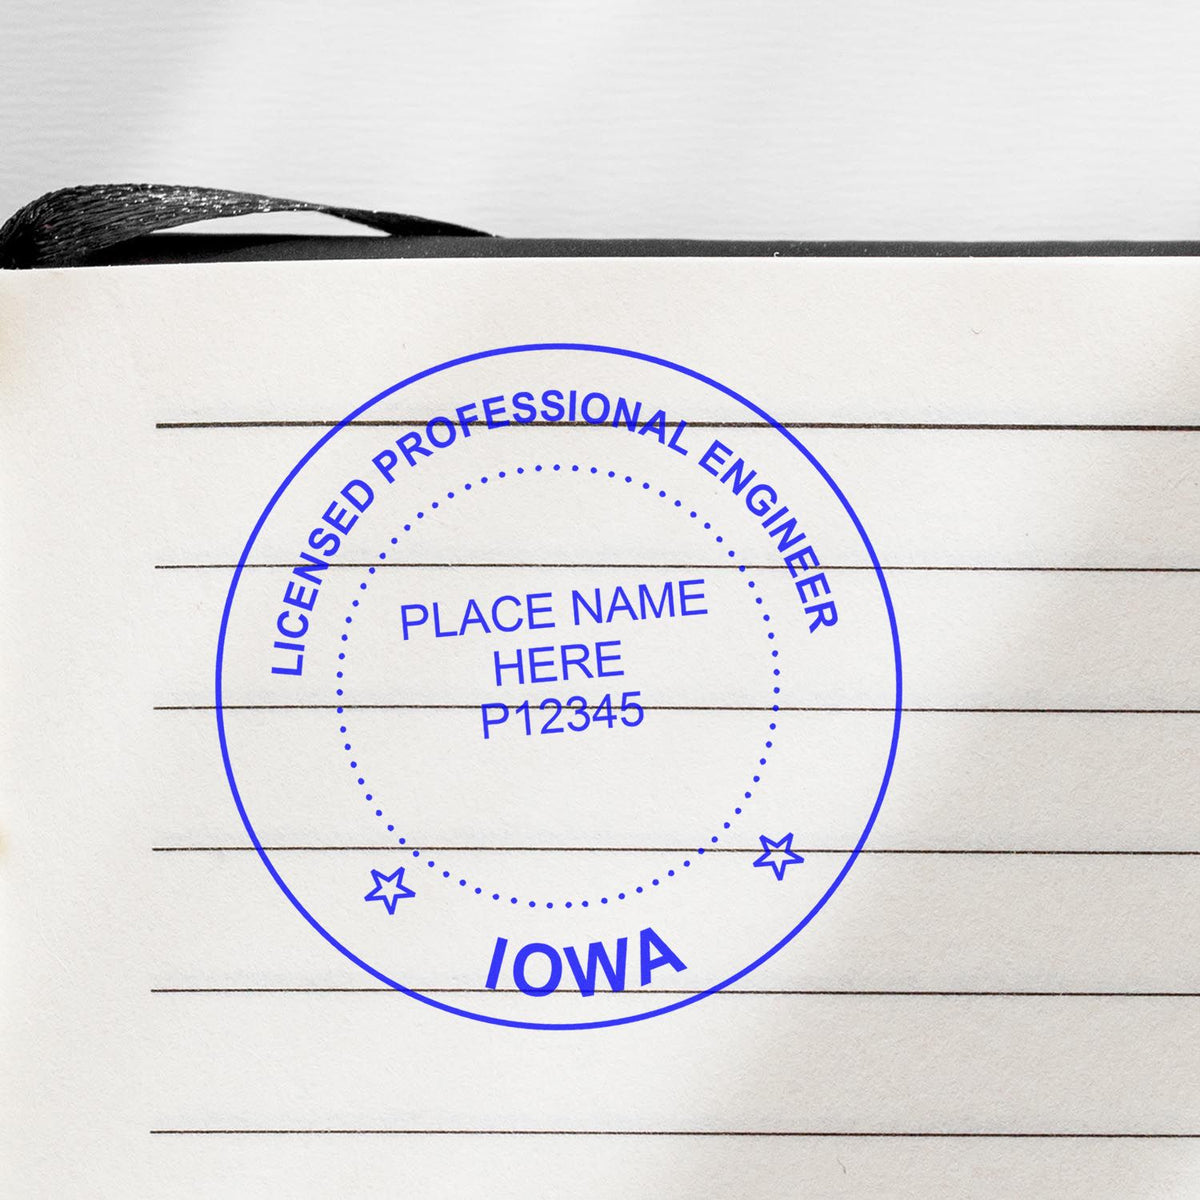 The Slim Pre-Inked Iowa Professional Engineer Seal Stamp stamp impression comes to life with a crisp, detailed photo on paper - showcasing true professional quality.